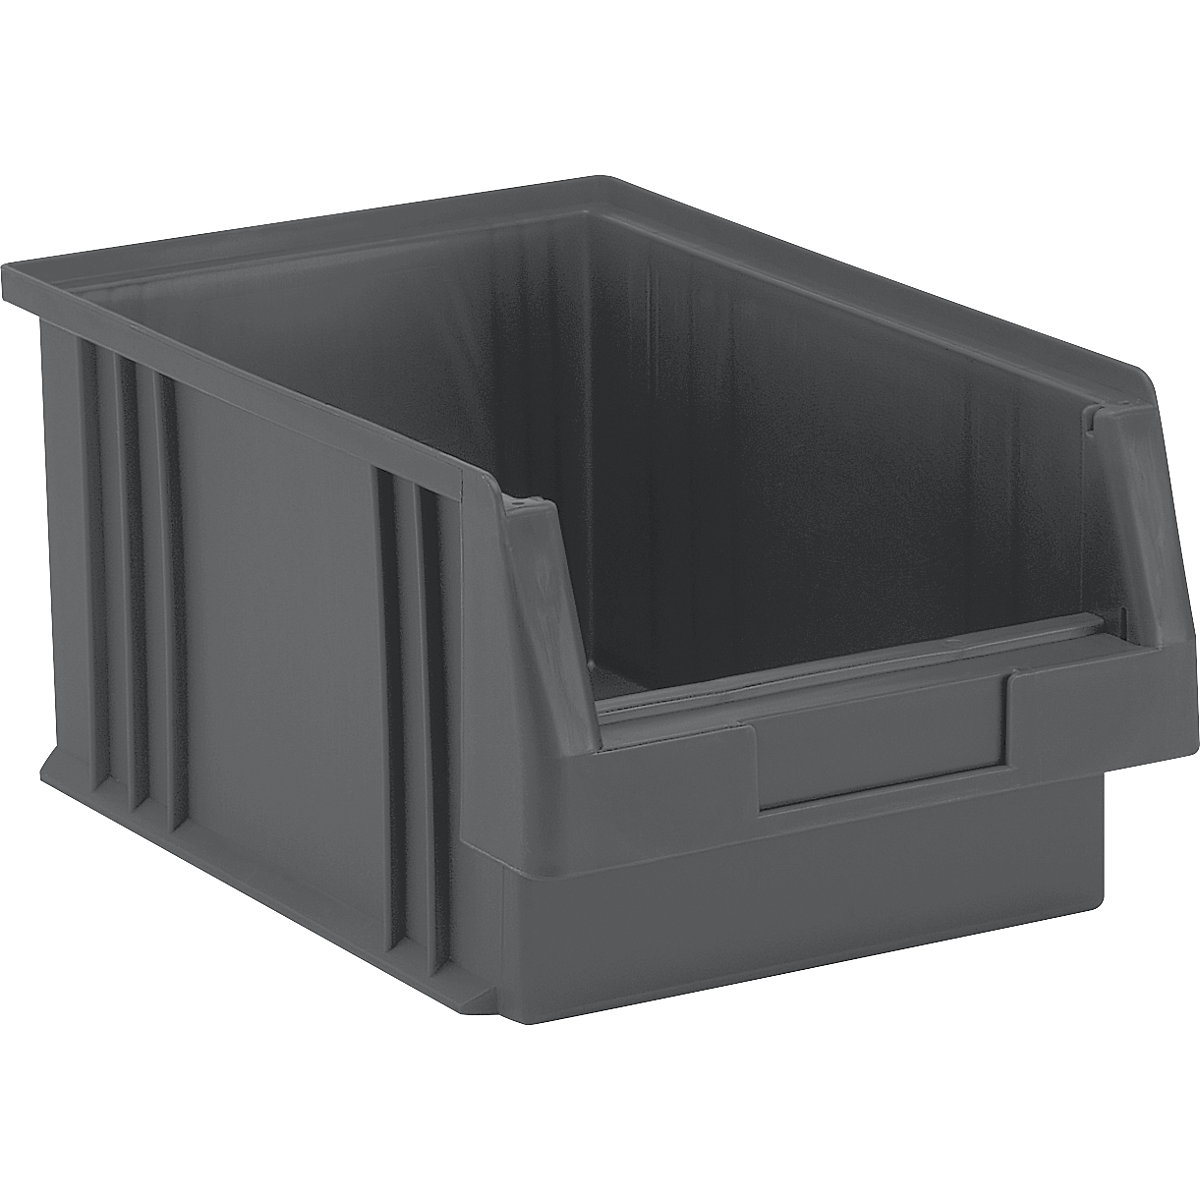 Open fronted storage bin made of polypropylene, 7.4 l capacity, pack of 10, grey-5